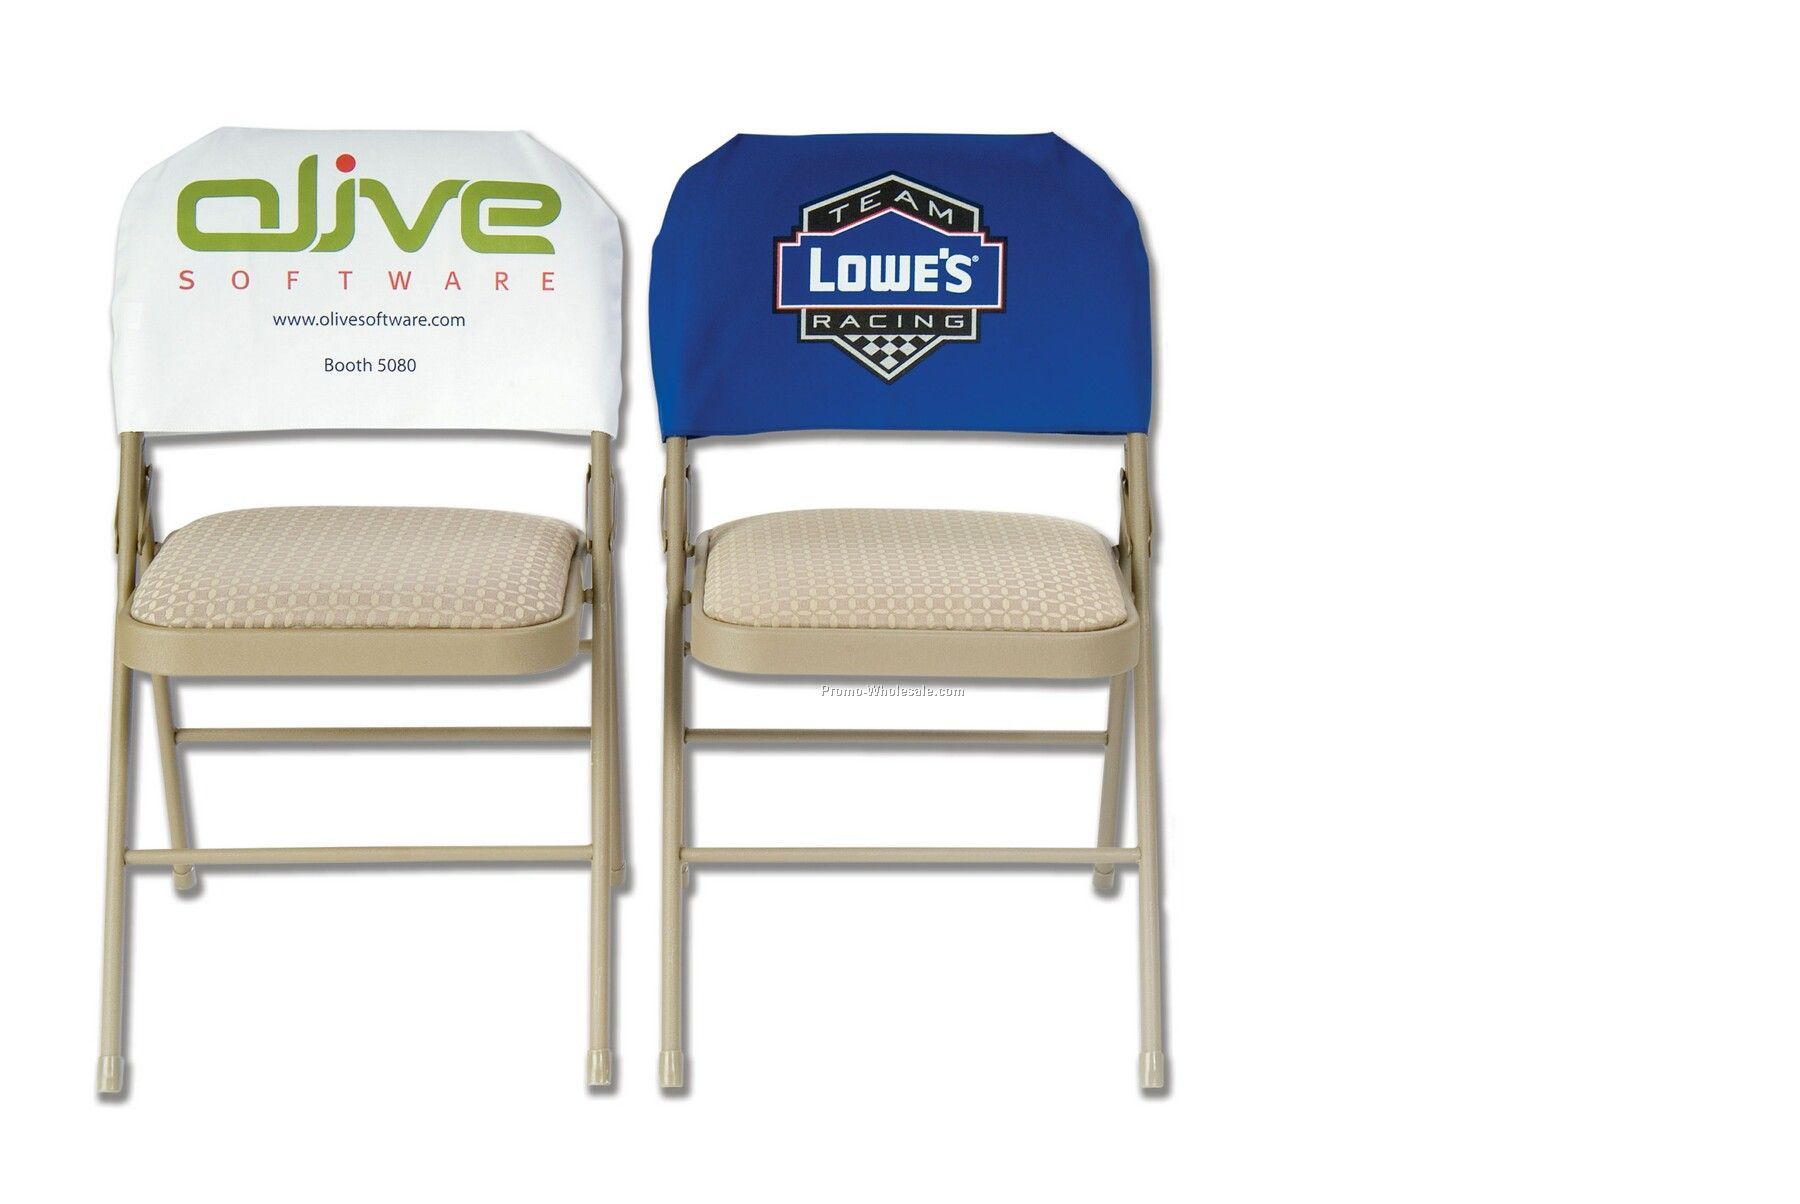 20"x11-1/2" Fitted Twill Chair Back Cover (Printed)